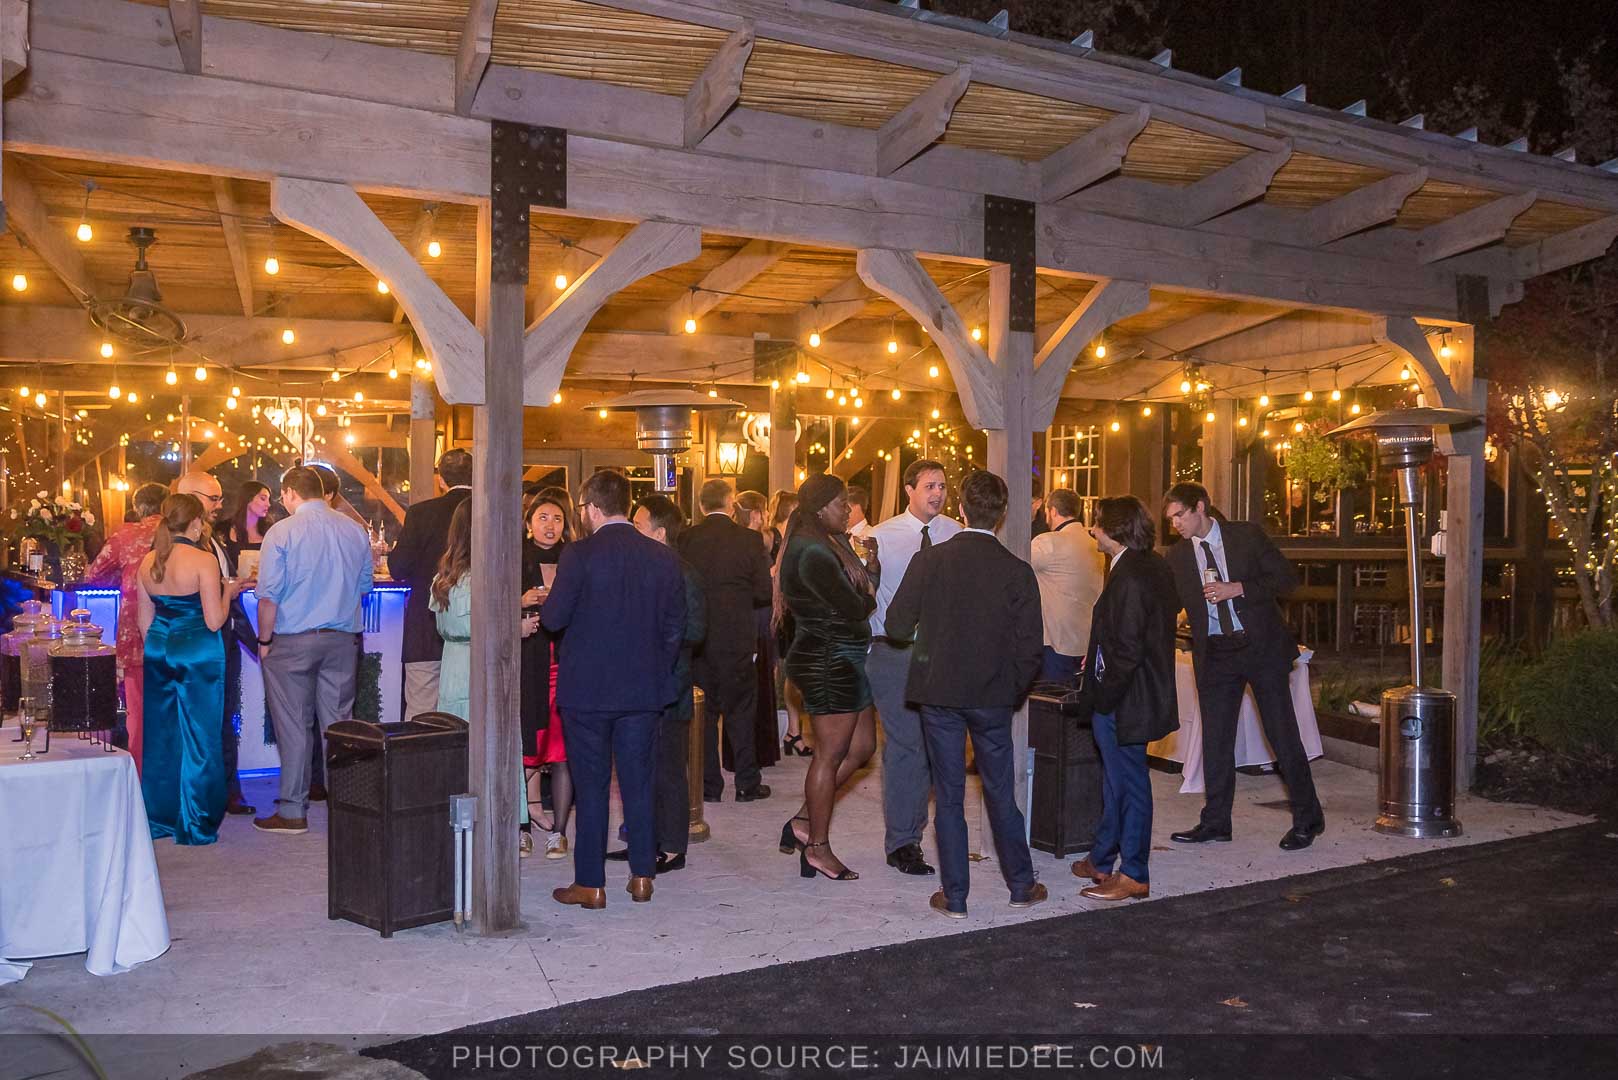 Rocky's Lake Estate Wedding Venue - reception - guests gathered in outdoor pavilion space